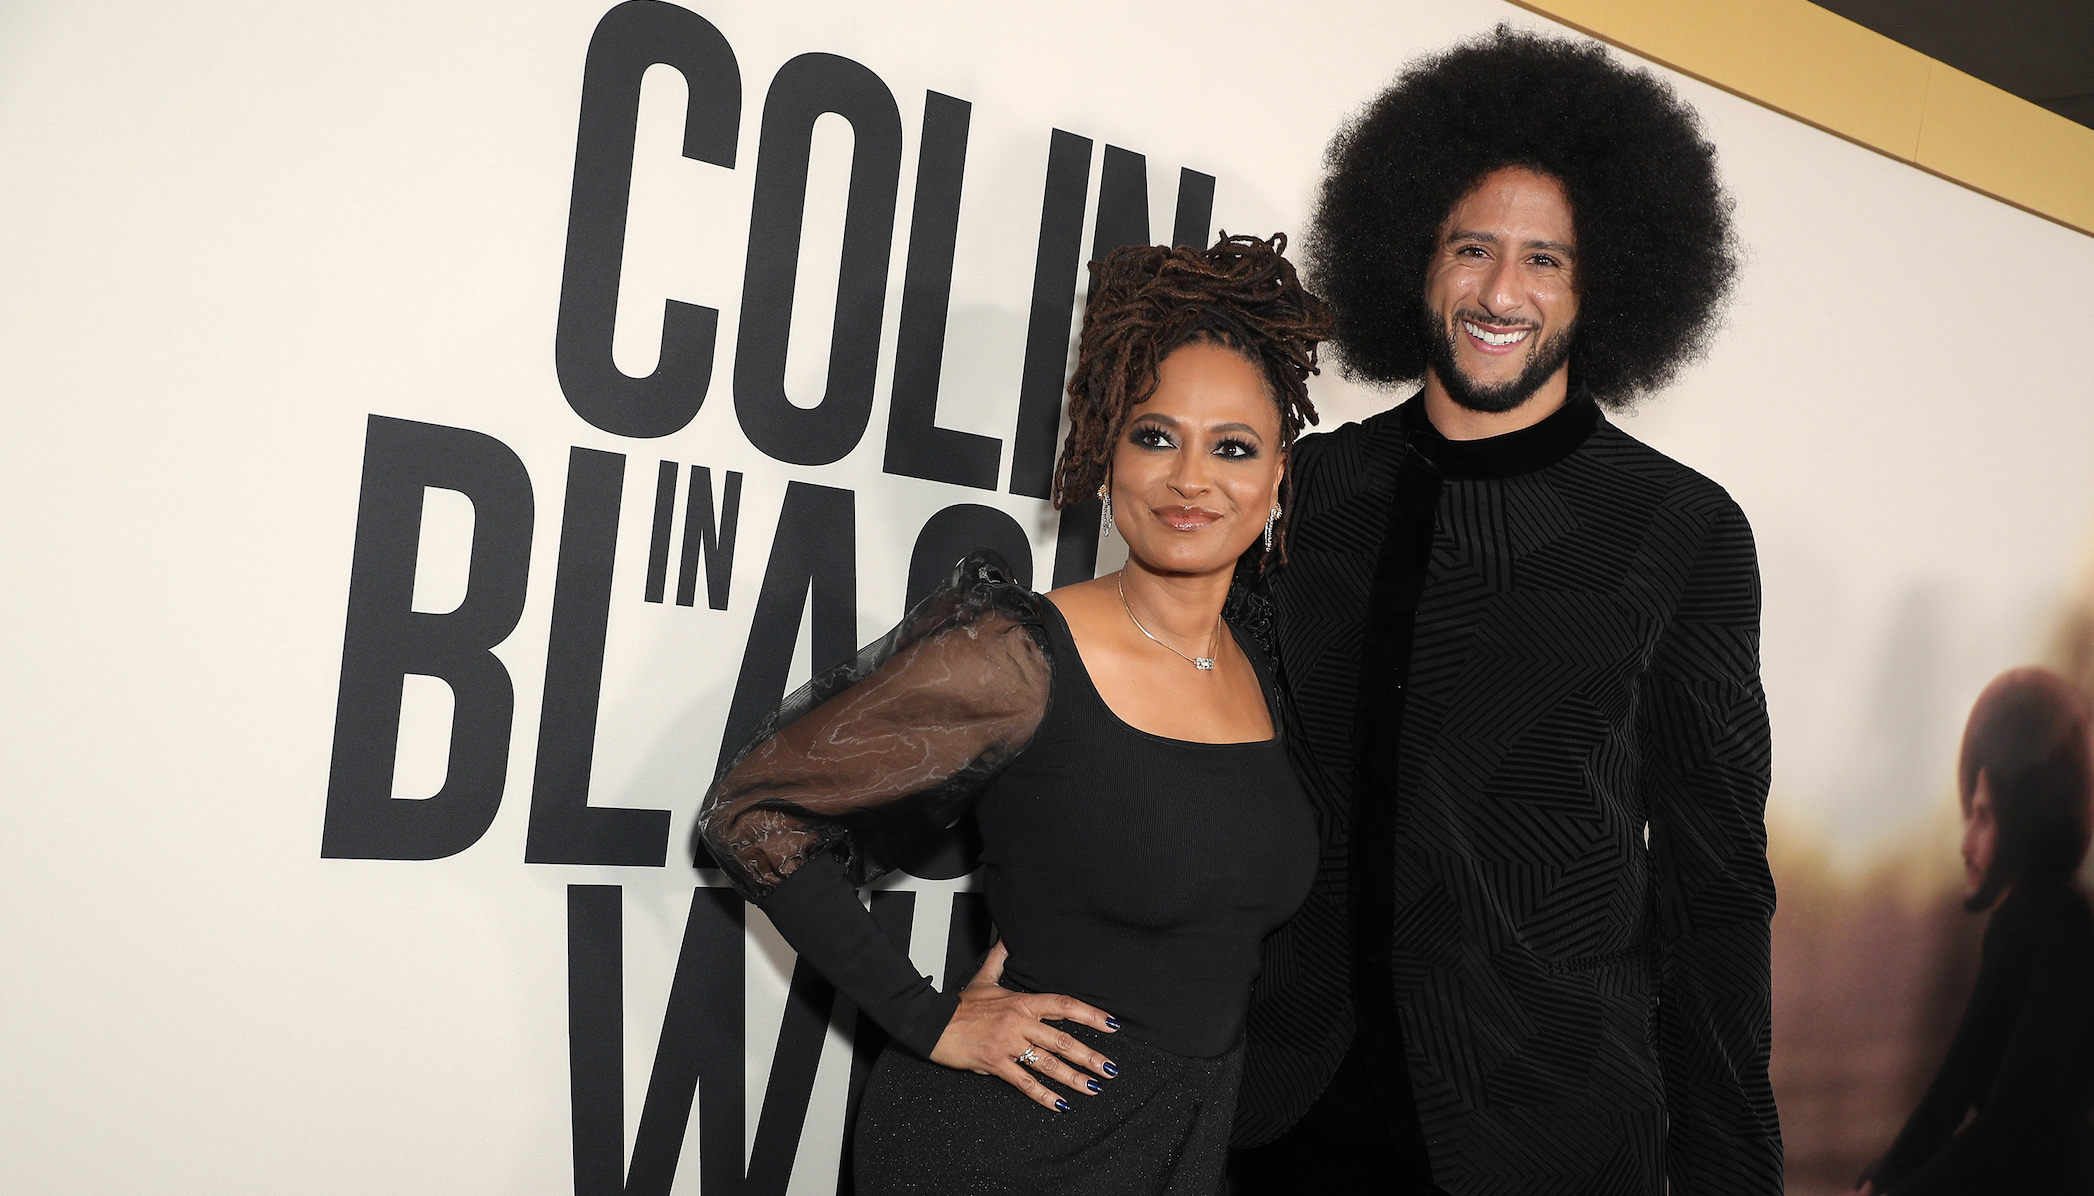 Colin in Black and White Ava DuVernay and Directors Talk Black Masculinity